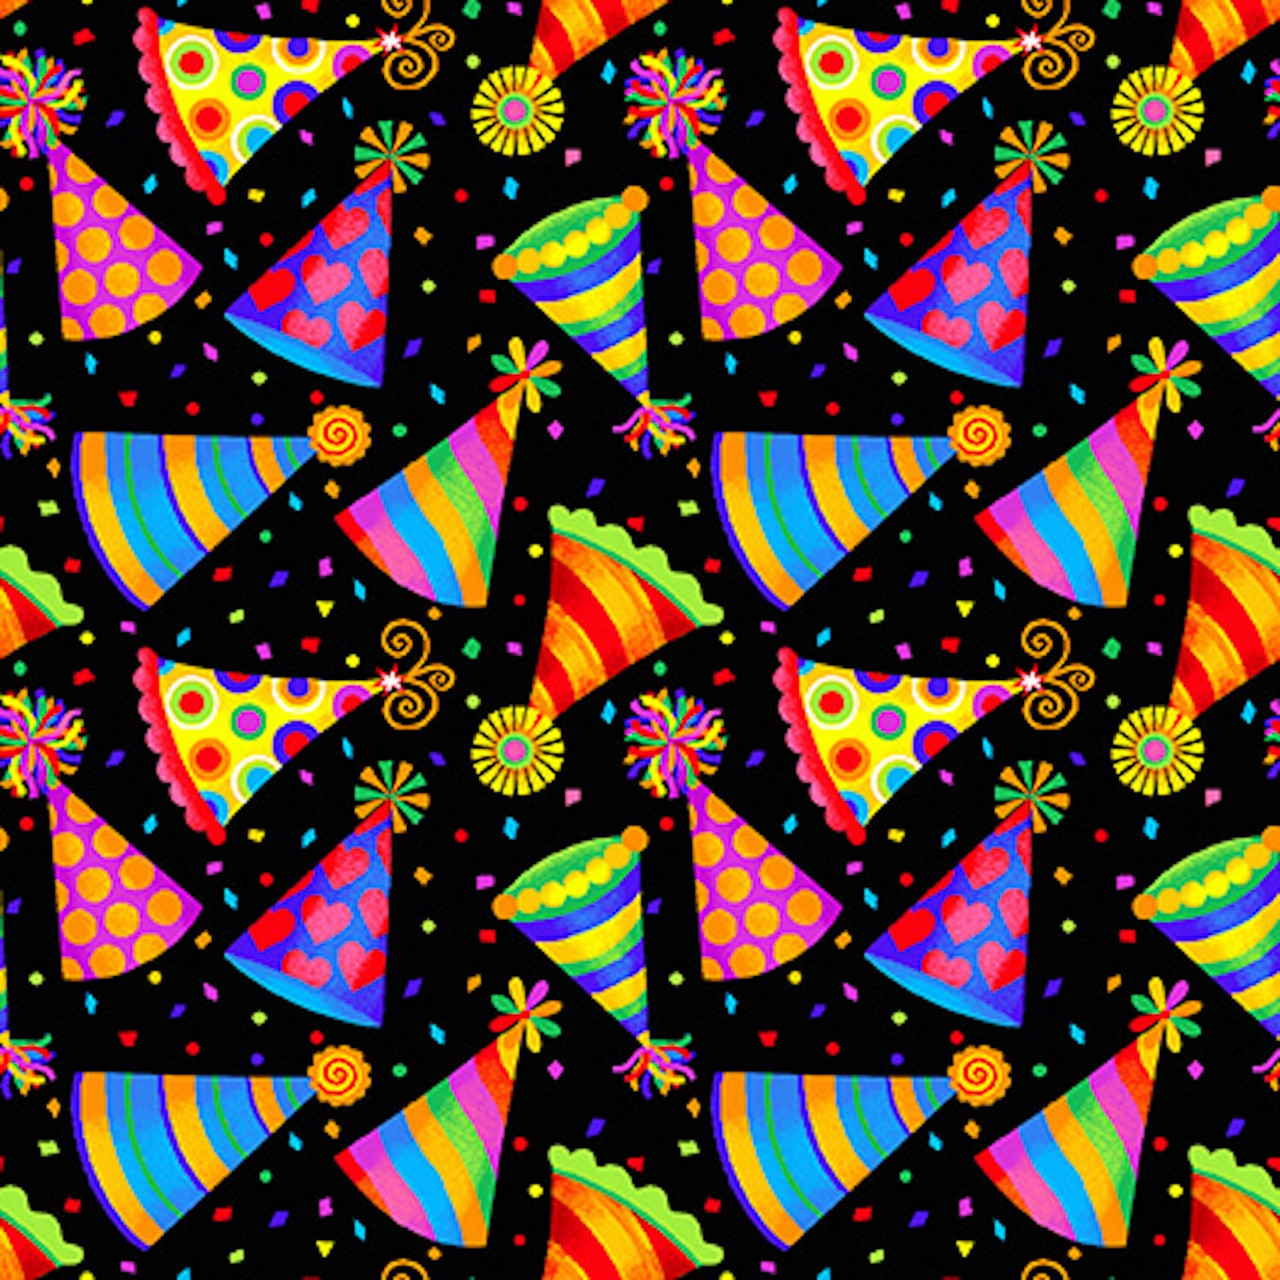 Studio E Party Time Tossed Birthday Hats Multi Cotton Fabric by The Yard